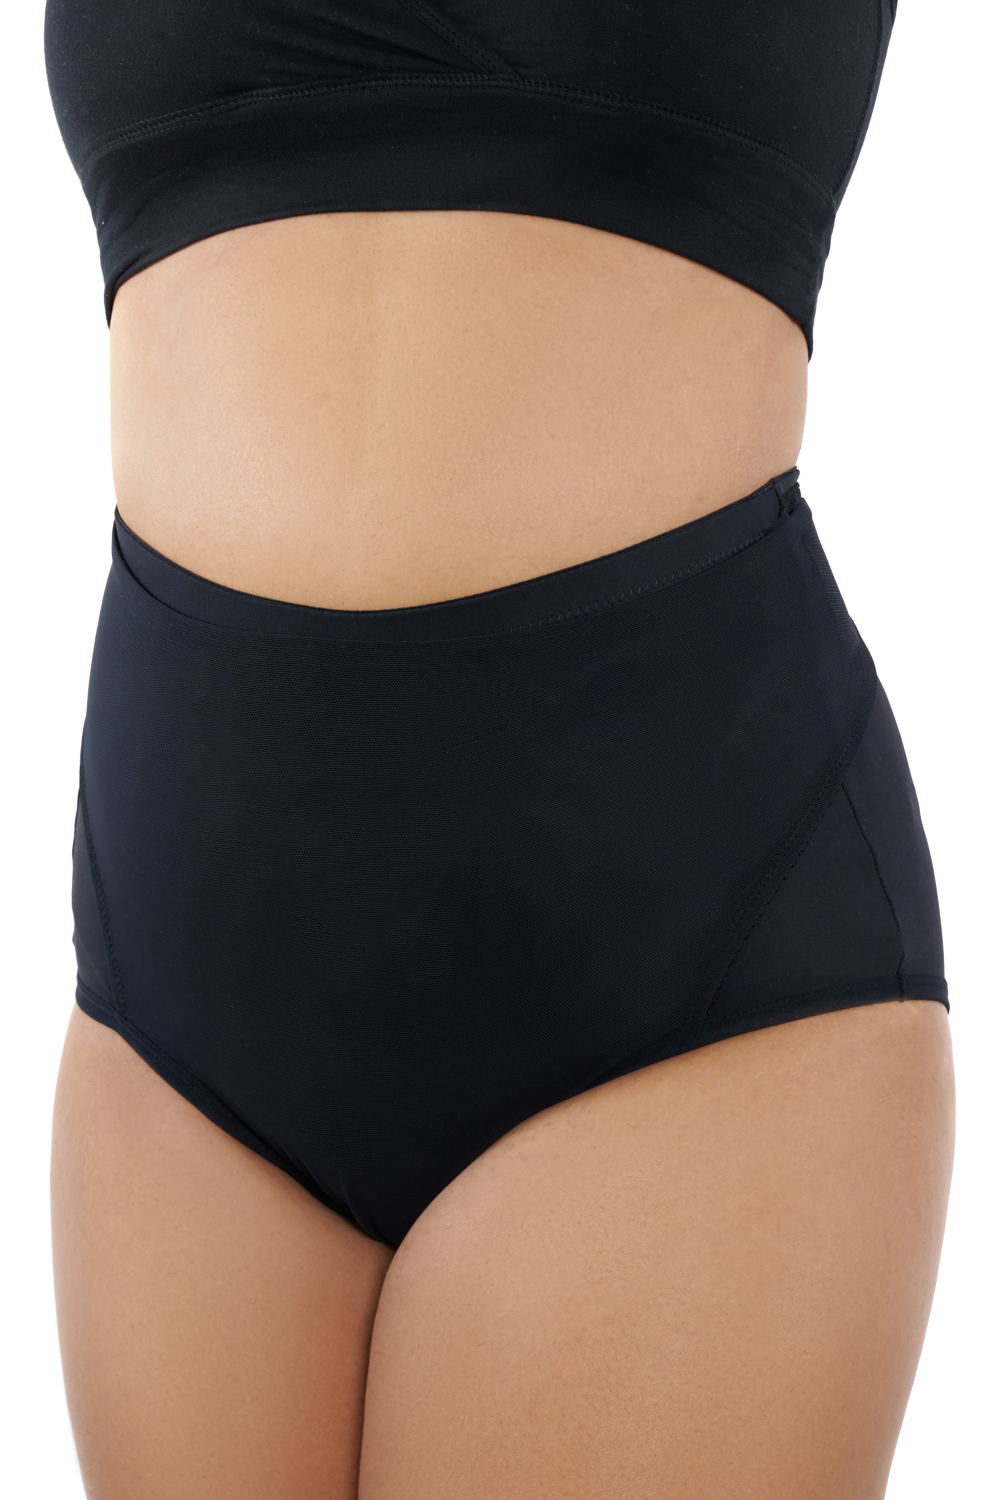 INNERSY Period Underwear for Women High Waisted Postpartum Maternity  Panties Plus Size 3-Pack (4XL,Black With Dark Lining)